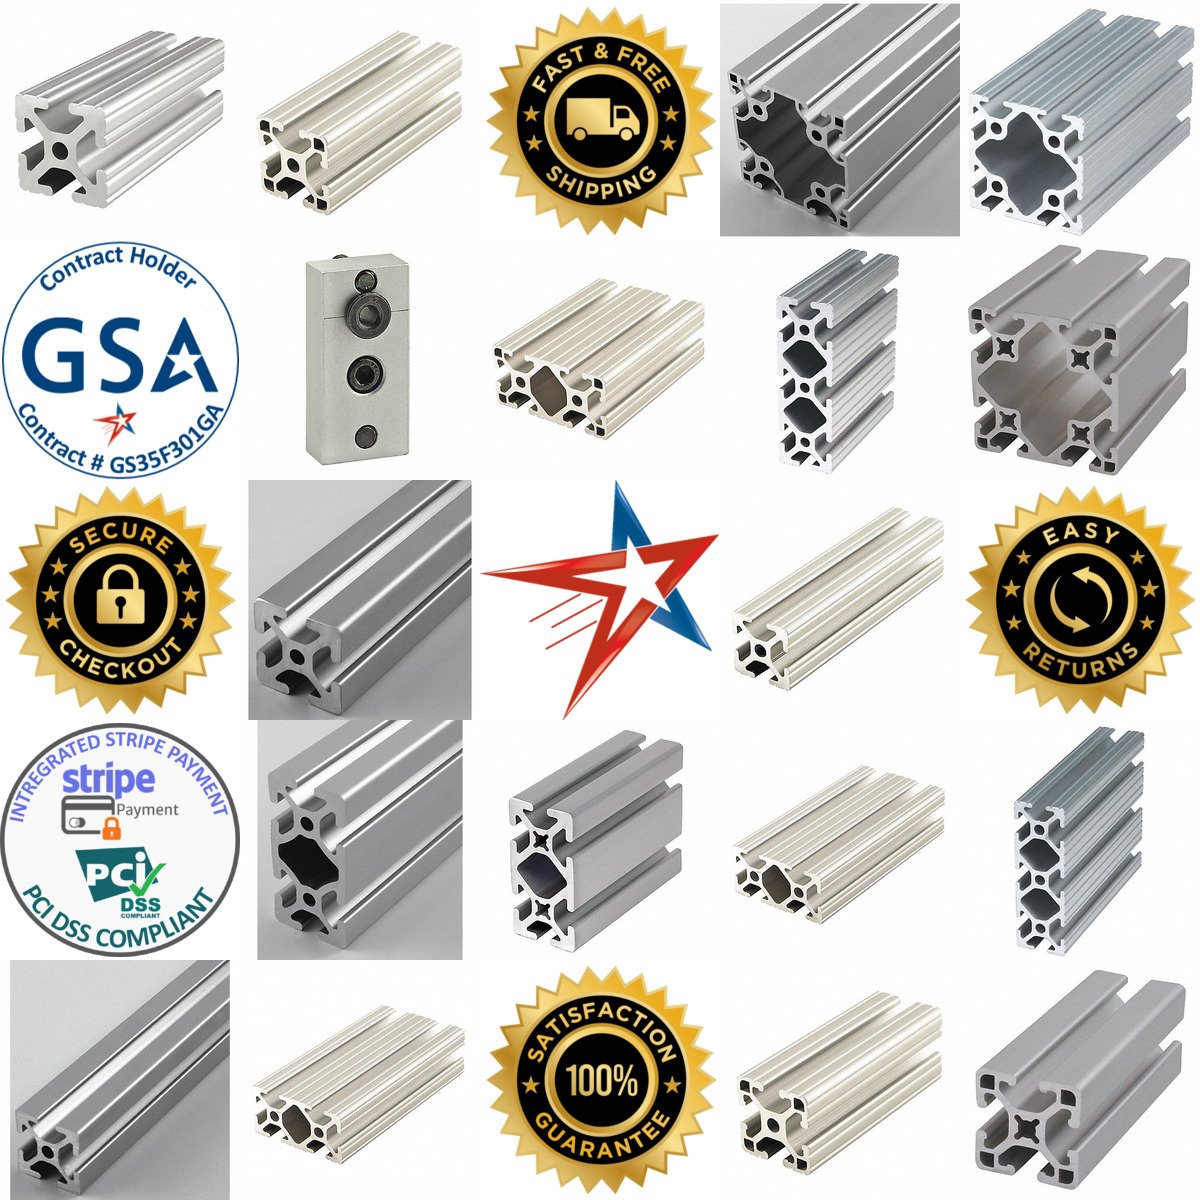 A selection of t Slot Framing System Profiles products on GoVets